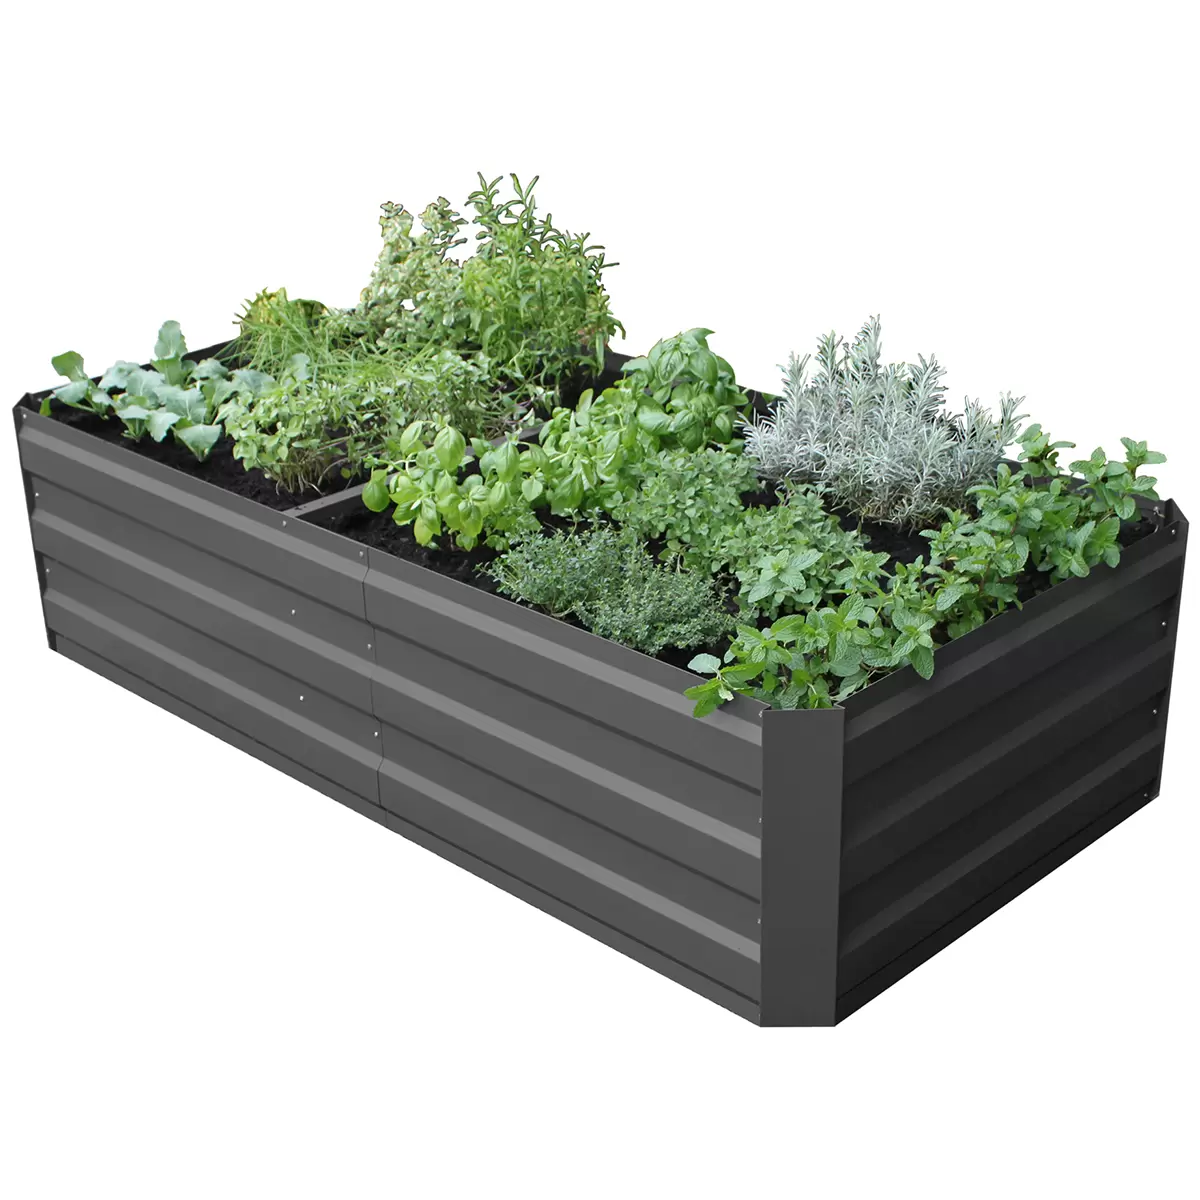 Green Life LARGE GARDEN BED with Cover - Slate Grey